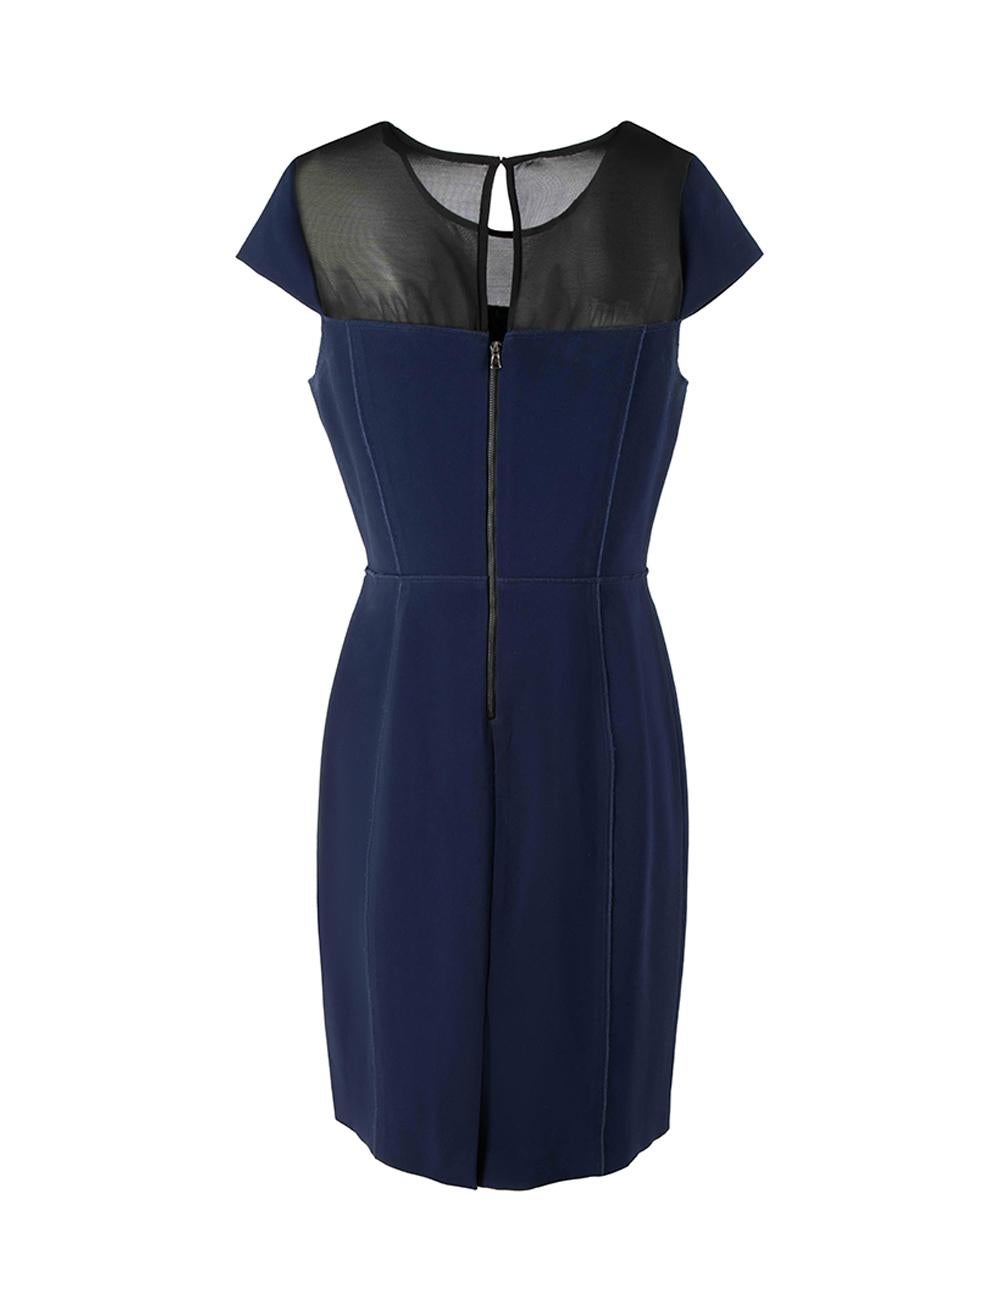 Navy Blue with Black Sheer Shoulder Detail Sleeveless Mini Dress Size XL In Good Condition For Sale In London, GB